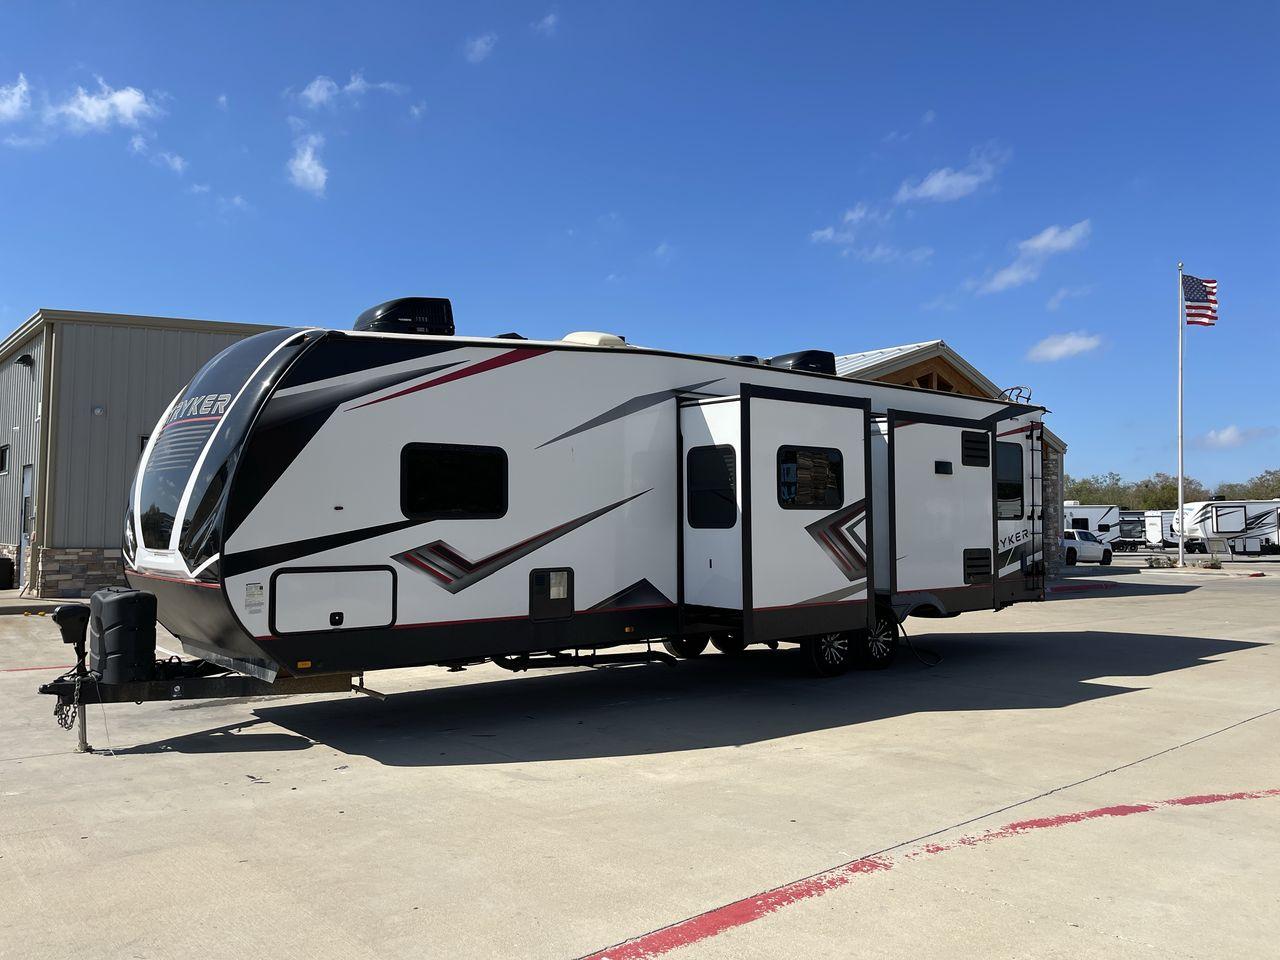 2021 CRUISER RV STRYKER 3414 (5RXGB392XM1) , Length: 38.75 ft. | Dry Weight: 9,608 lbs. | Gross Weight: 12,800 lbs. | Slides: 2 transmission, located at 4319 N Main St, Cleburne, TX, 76033, (817) 678-5133, 32.385960, -97.391212 - The 2021 Cruiser RV Stryker 3414 is a meticulously crafted toy hauler that seamlessly integrates luxury, versatility, and durability to provide an exceptional on-the-road experience. Whether you're a passionate thrill-seeker indulging in outdoor sports or a discerning family seeking comfort, the Str - Photo #24